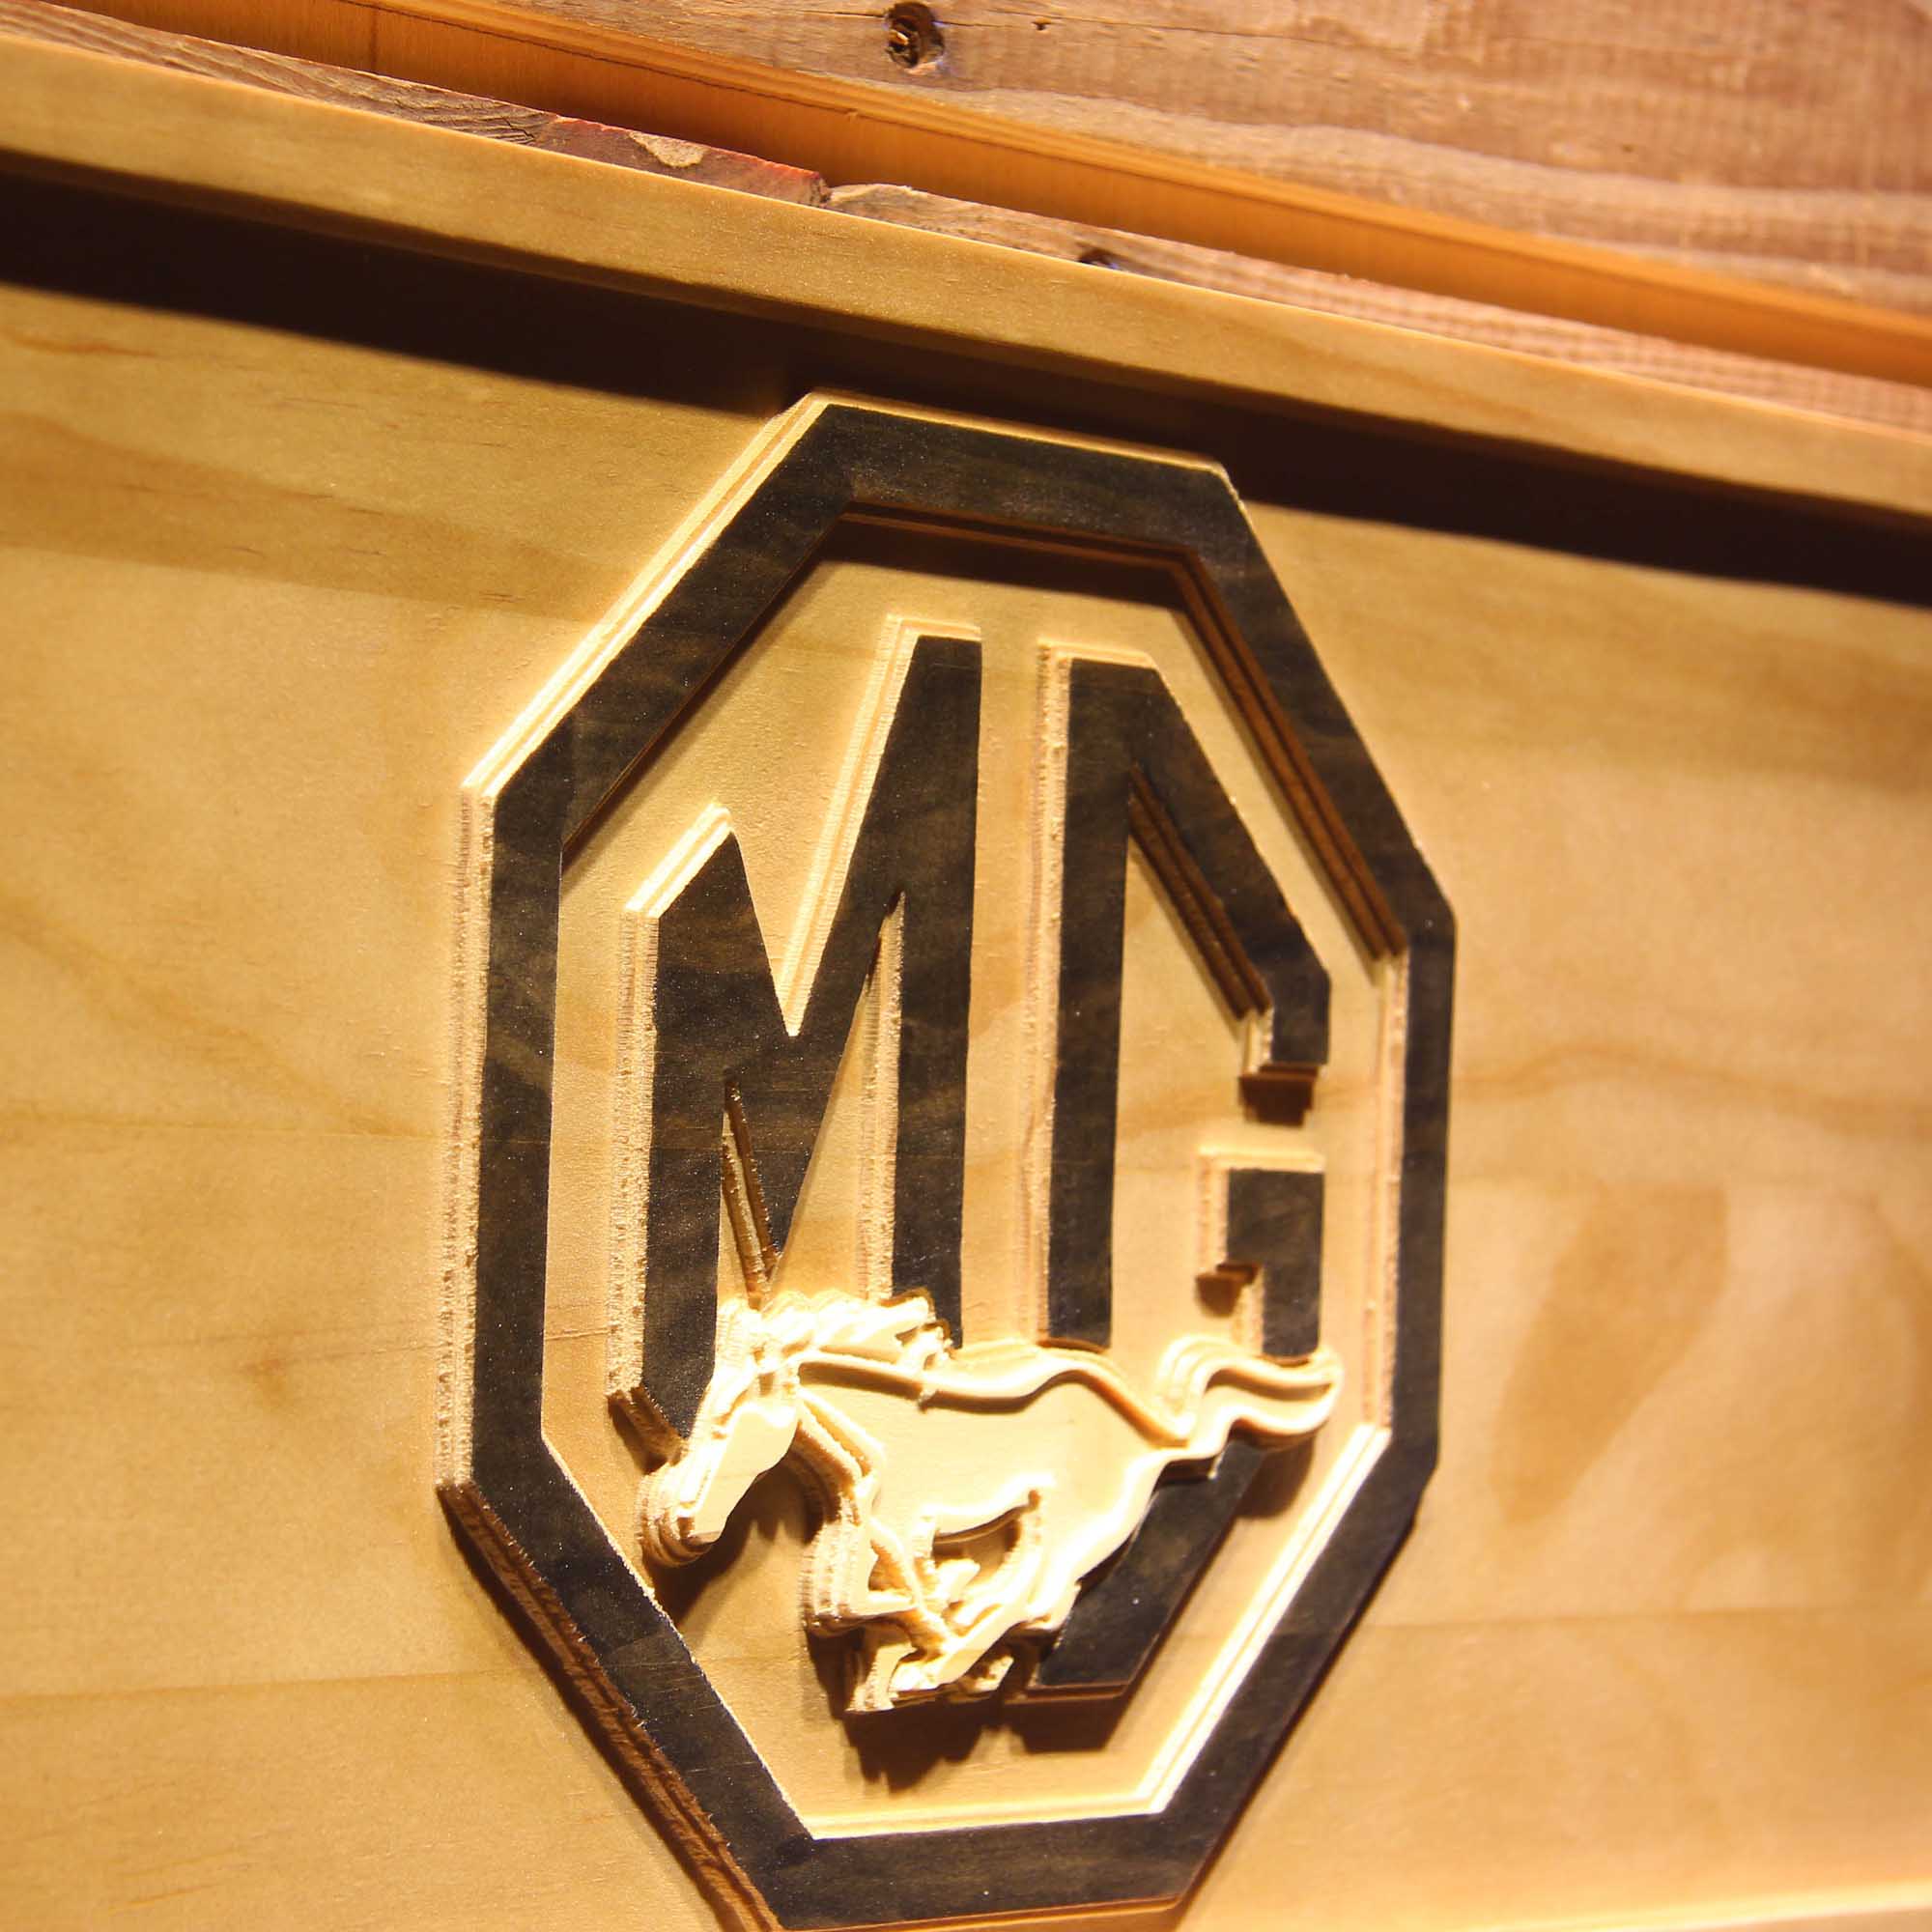 MG Mustang Car 3D Wooden Engrave Sign